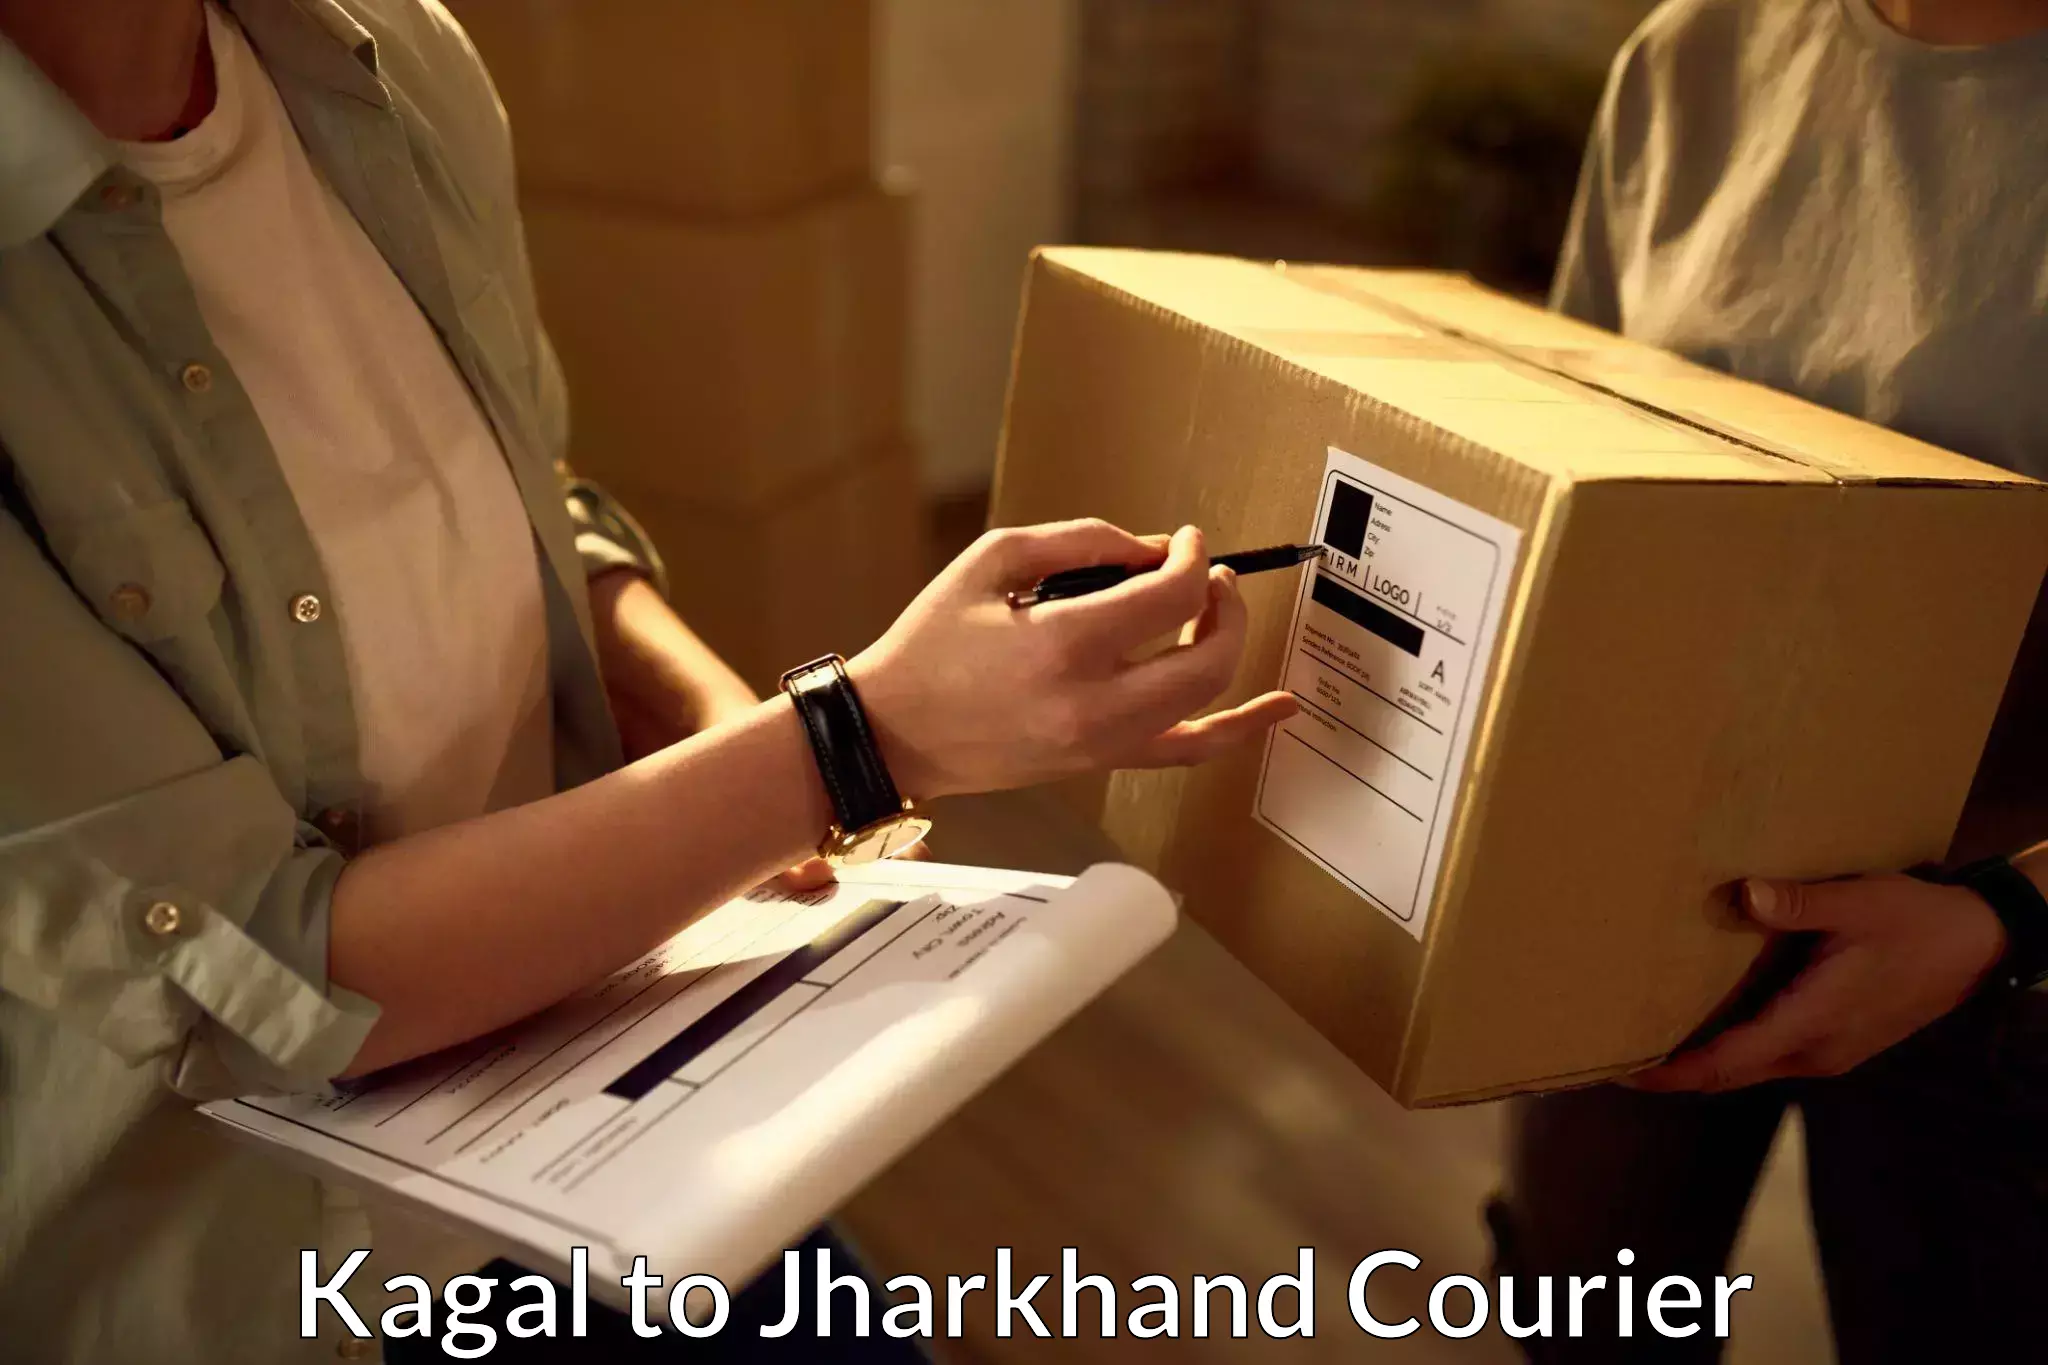 24-hour courier service Kagal to Domchanch